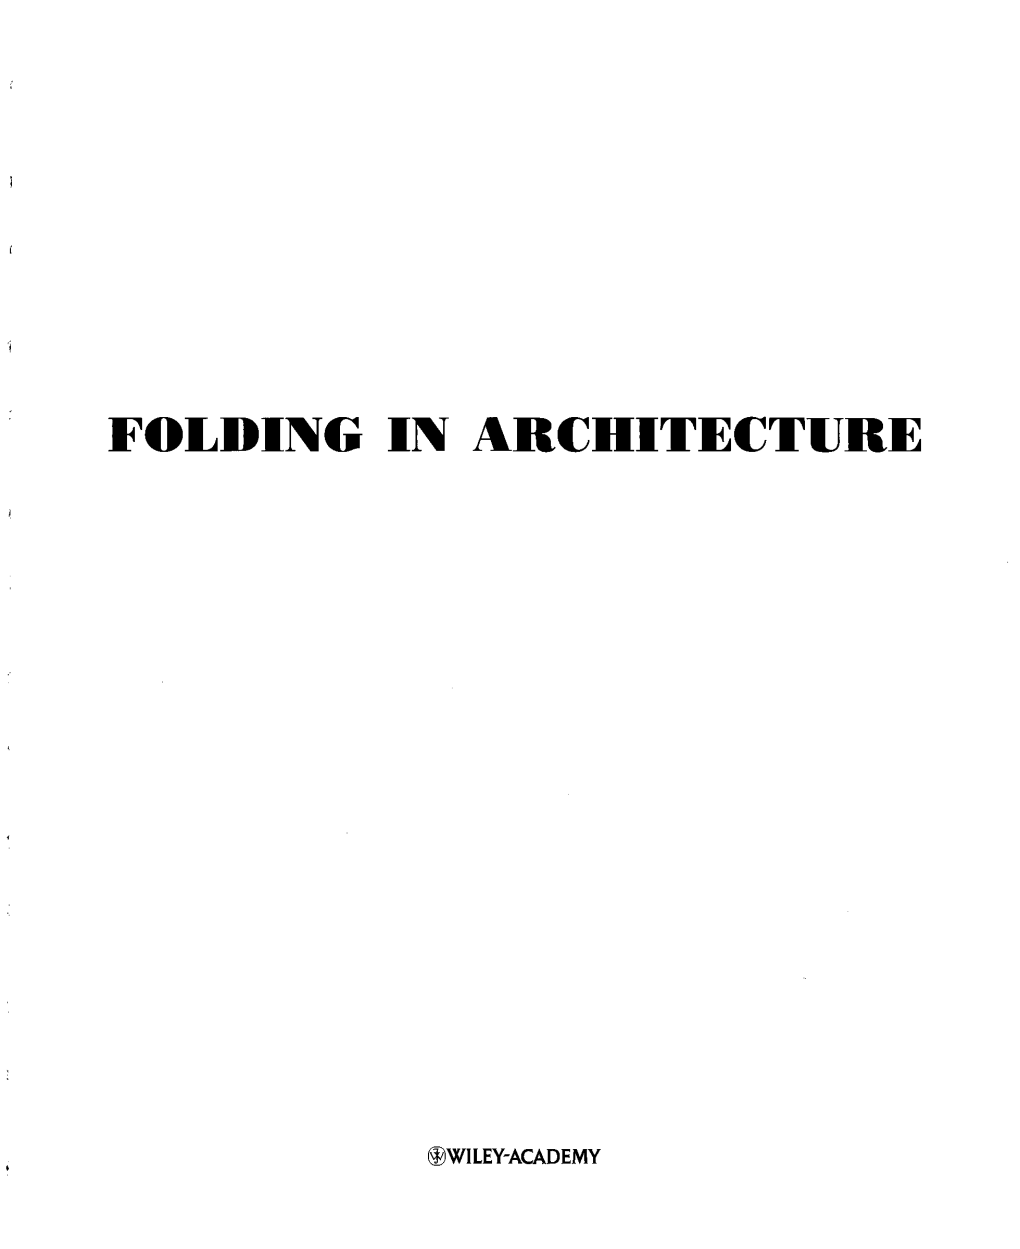 Folding in Architecture